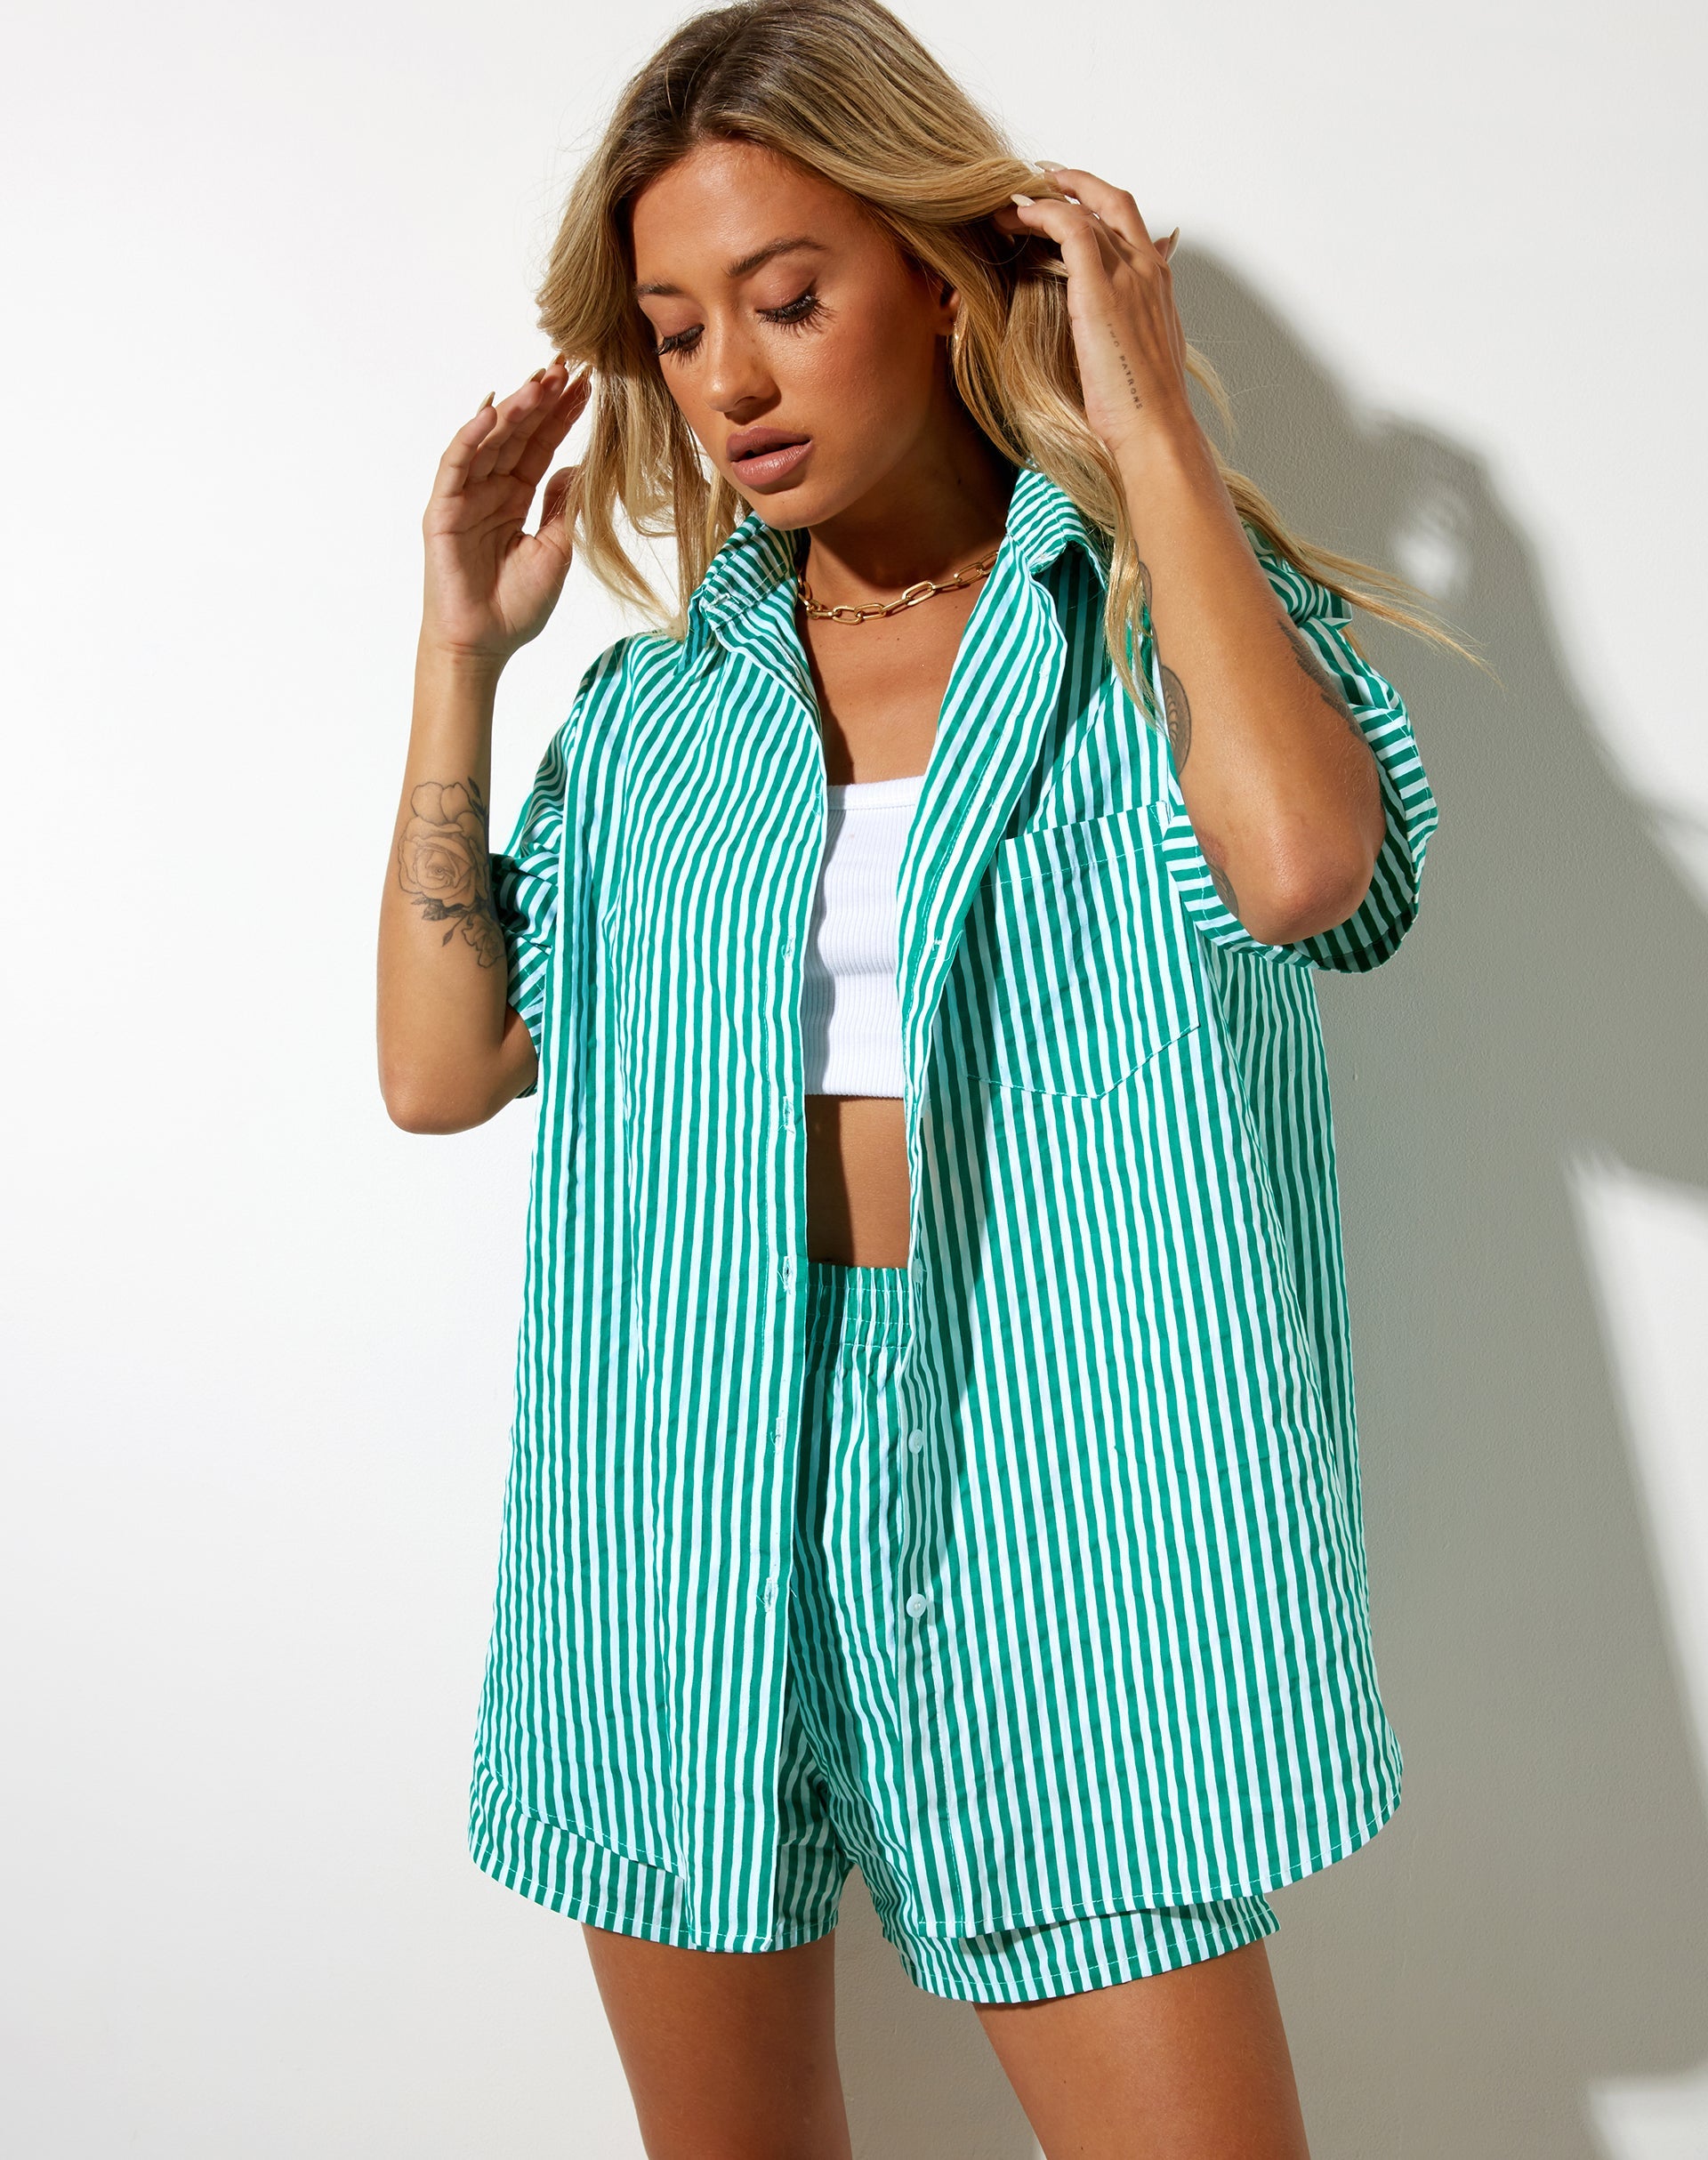 Image of SMITH SHIRT VERTICAL STRIPE GREEN WHITE